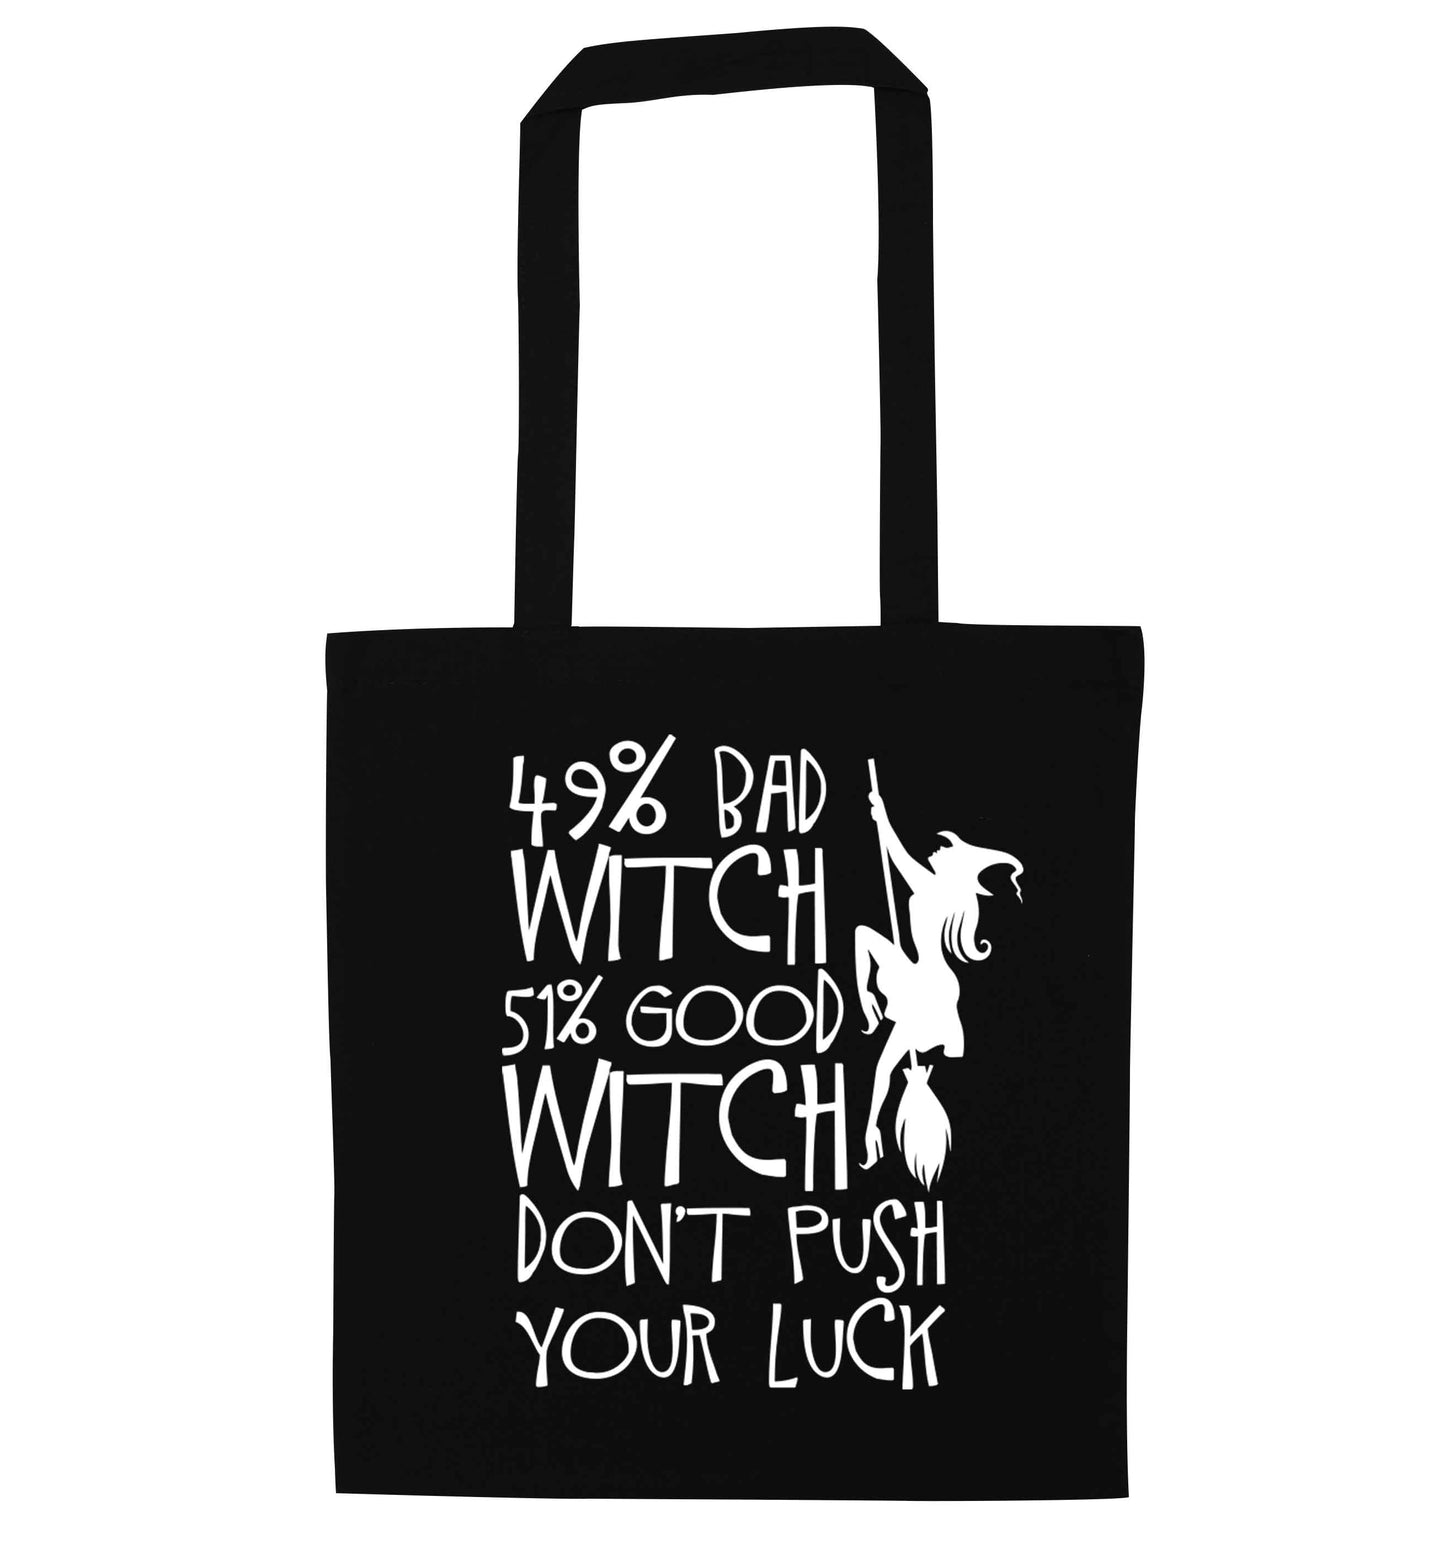 49% bad witch 51% good witch don't push your luck black tote bag